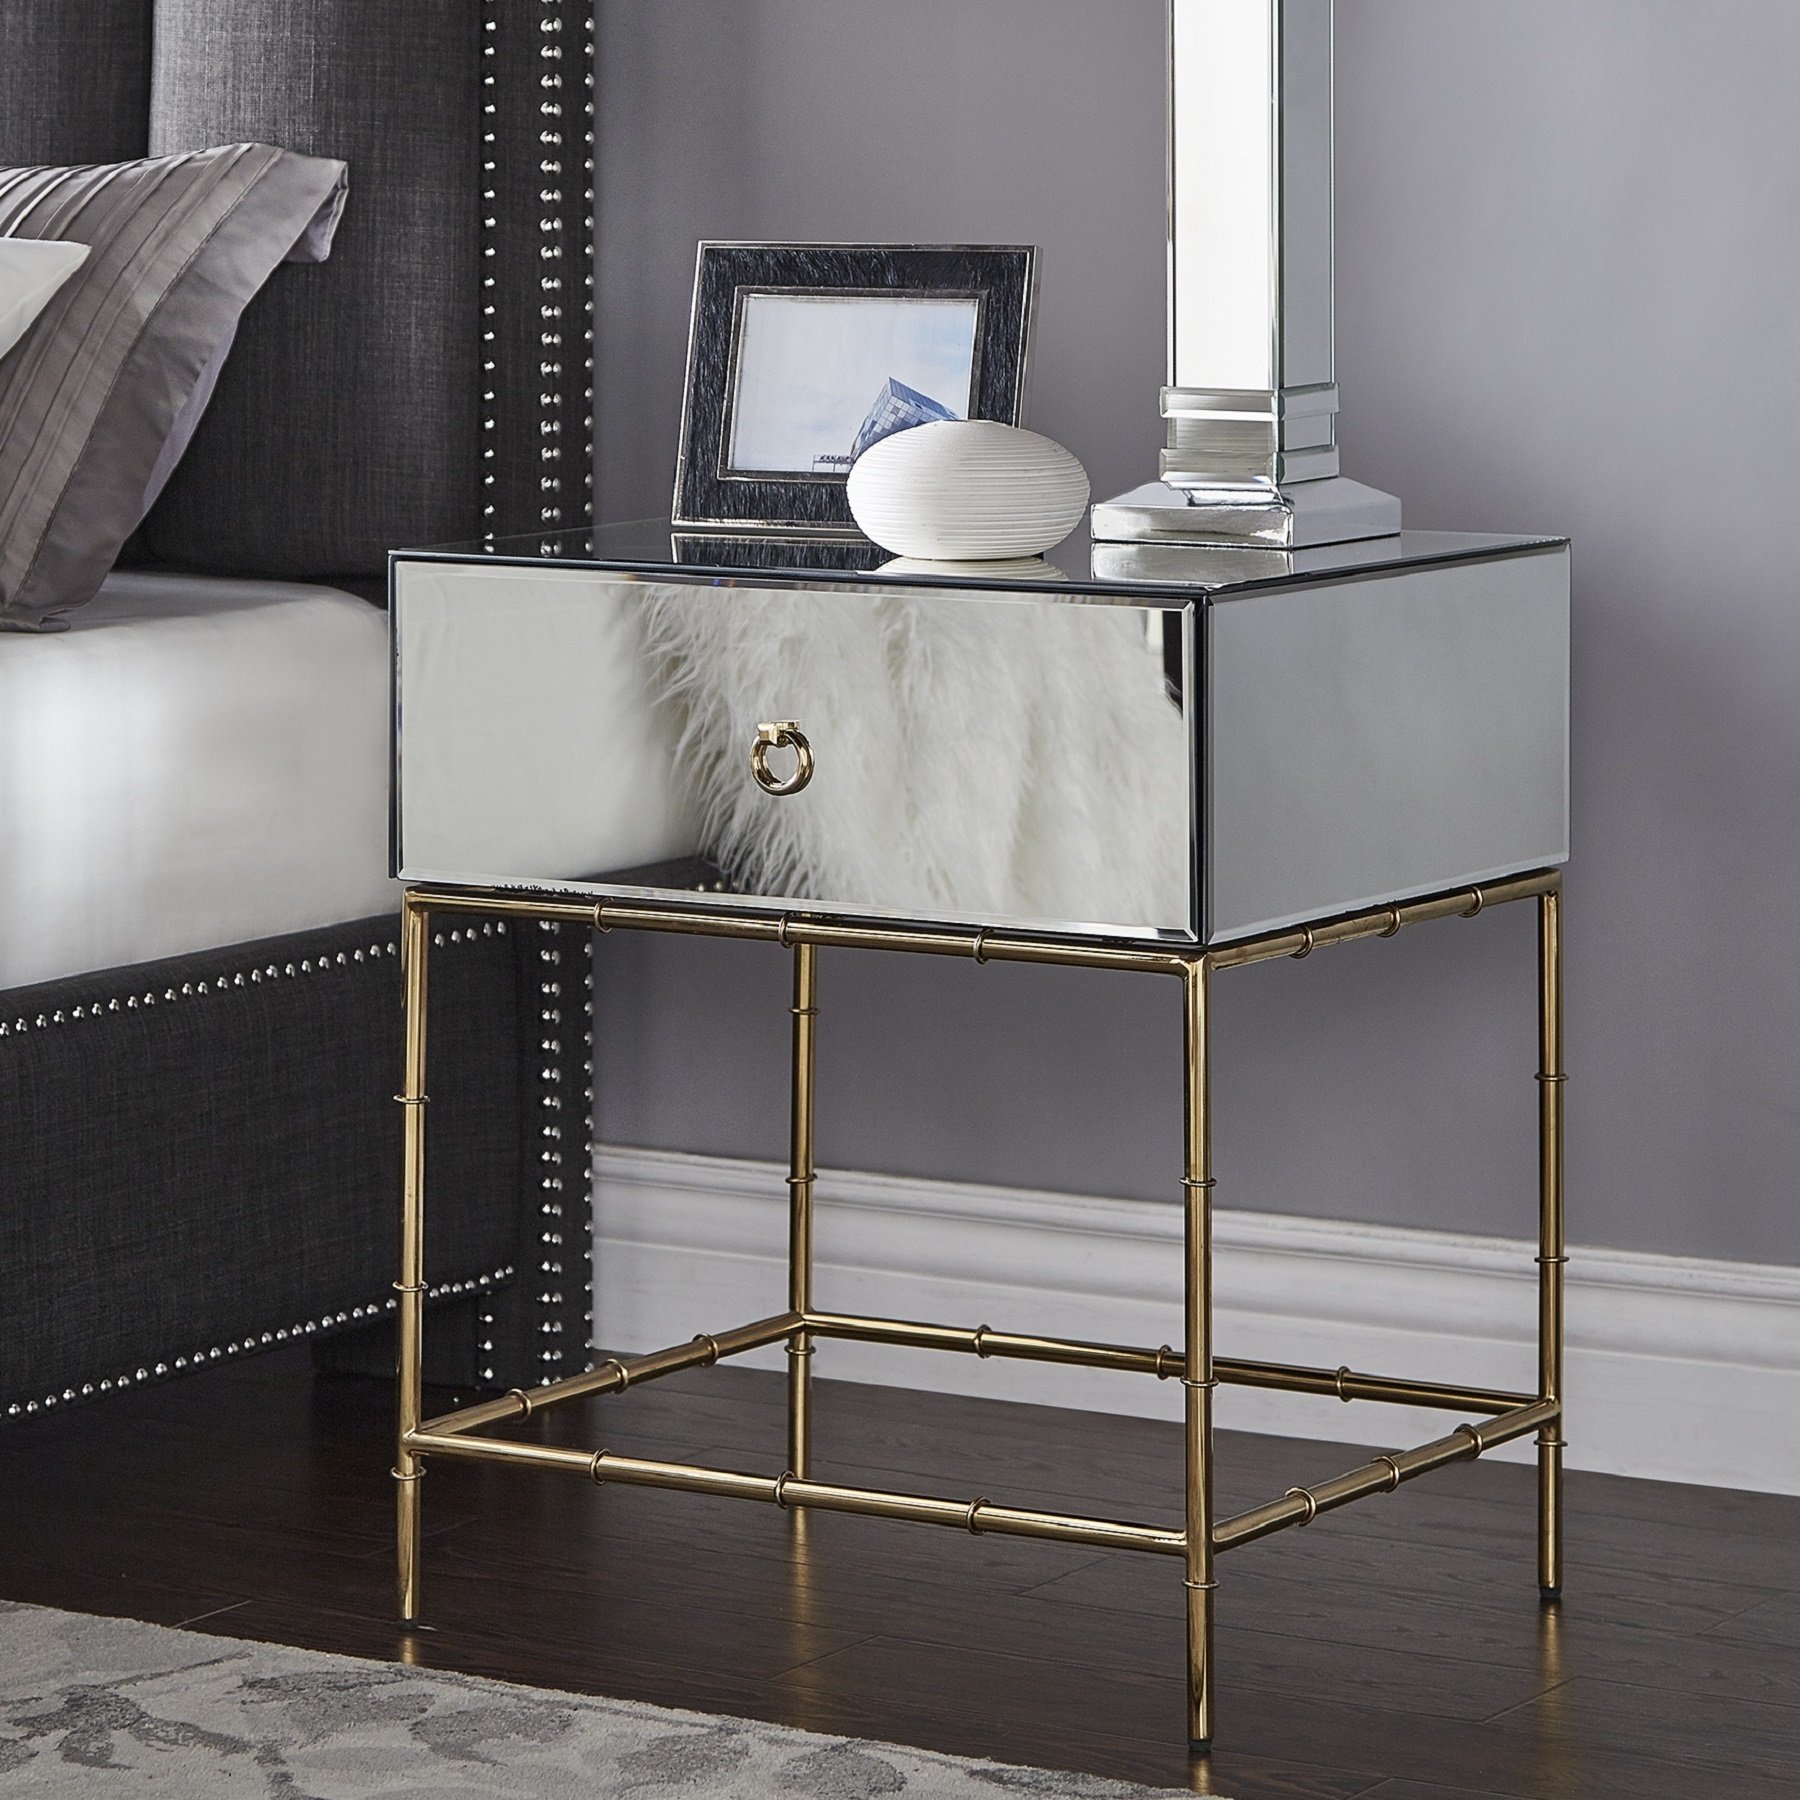 wade mirrored accent table with gold finish base inspire bold counter height kitchen storage verizon tablet plastic garden furniture sets tall lamps for bedroom pier one outdoor